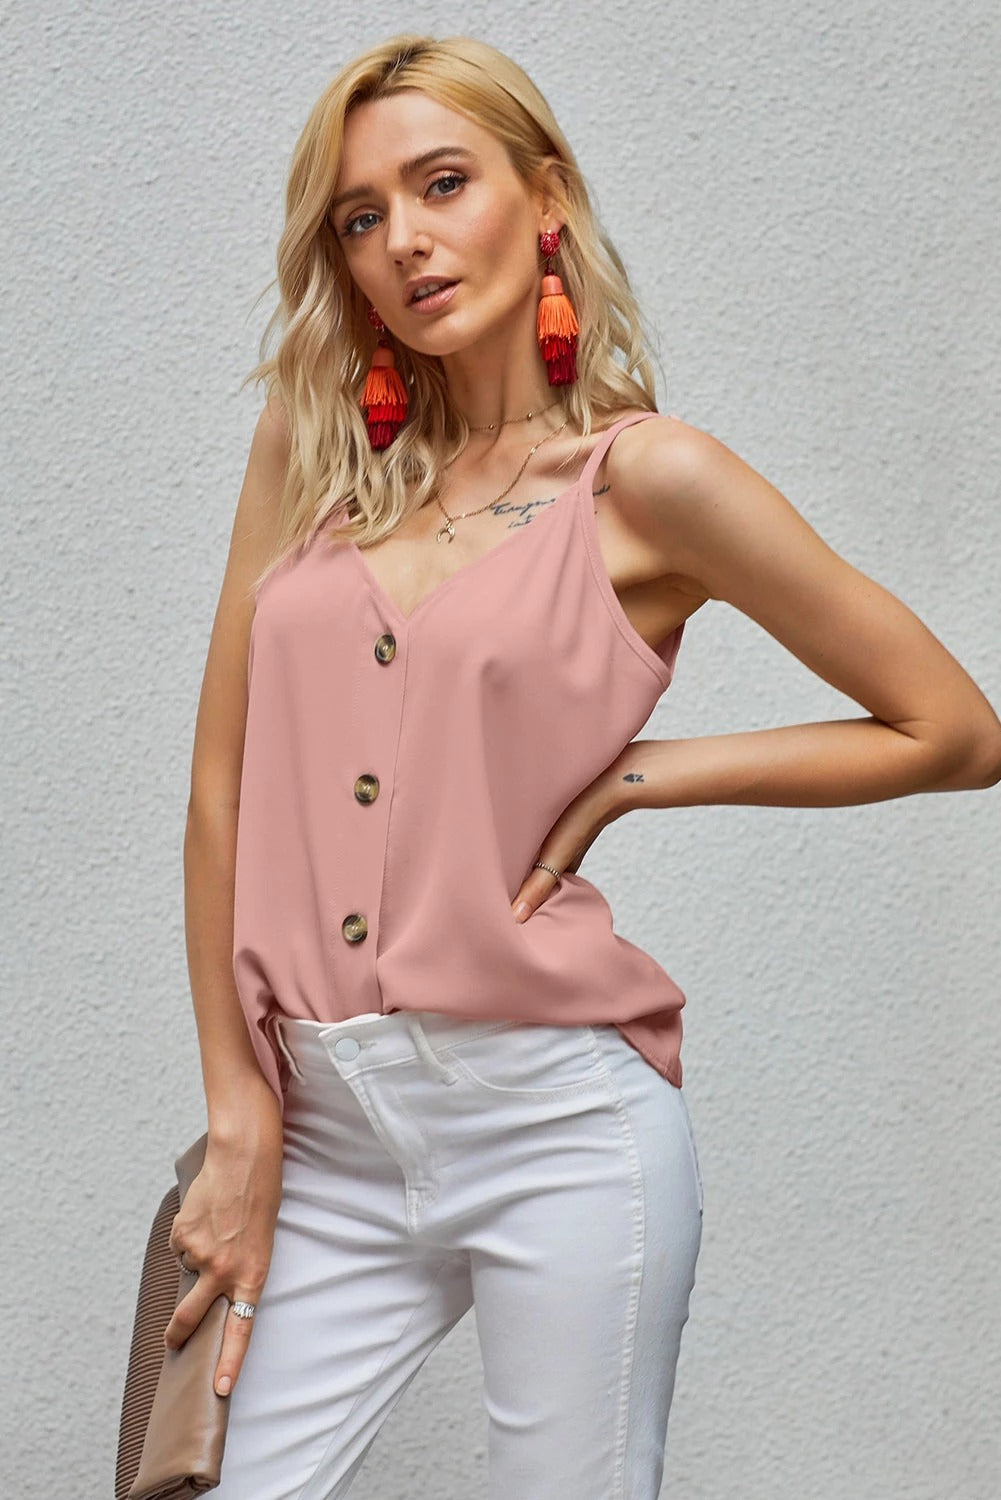 New Pink Spaghetti Strap Buttoned Tank Top